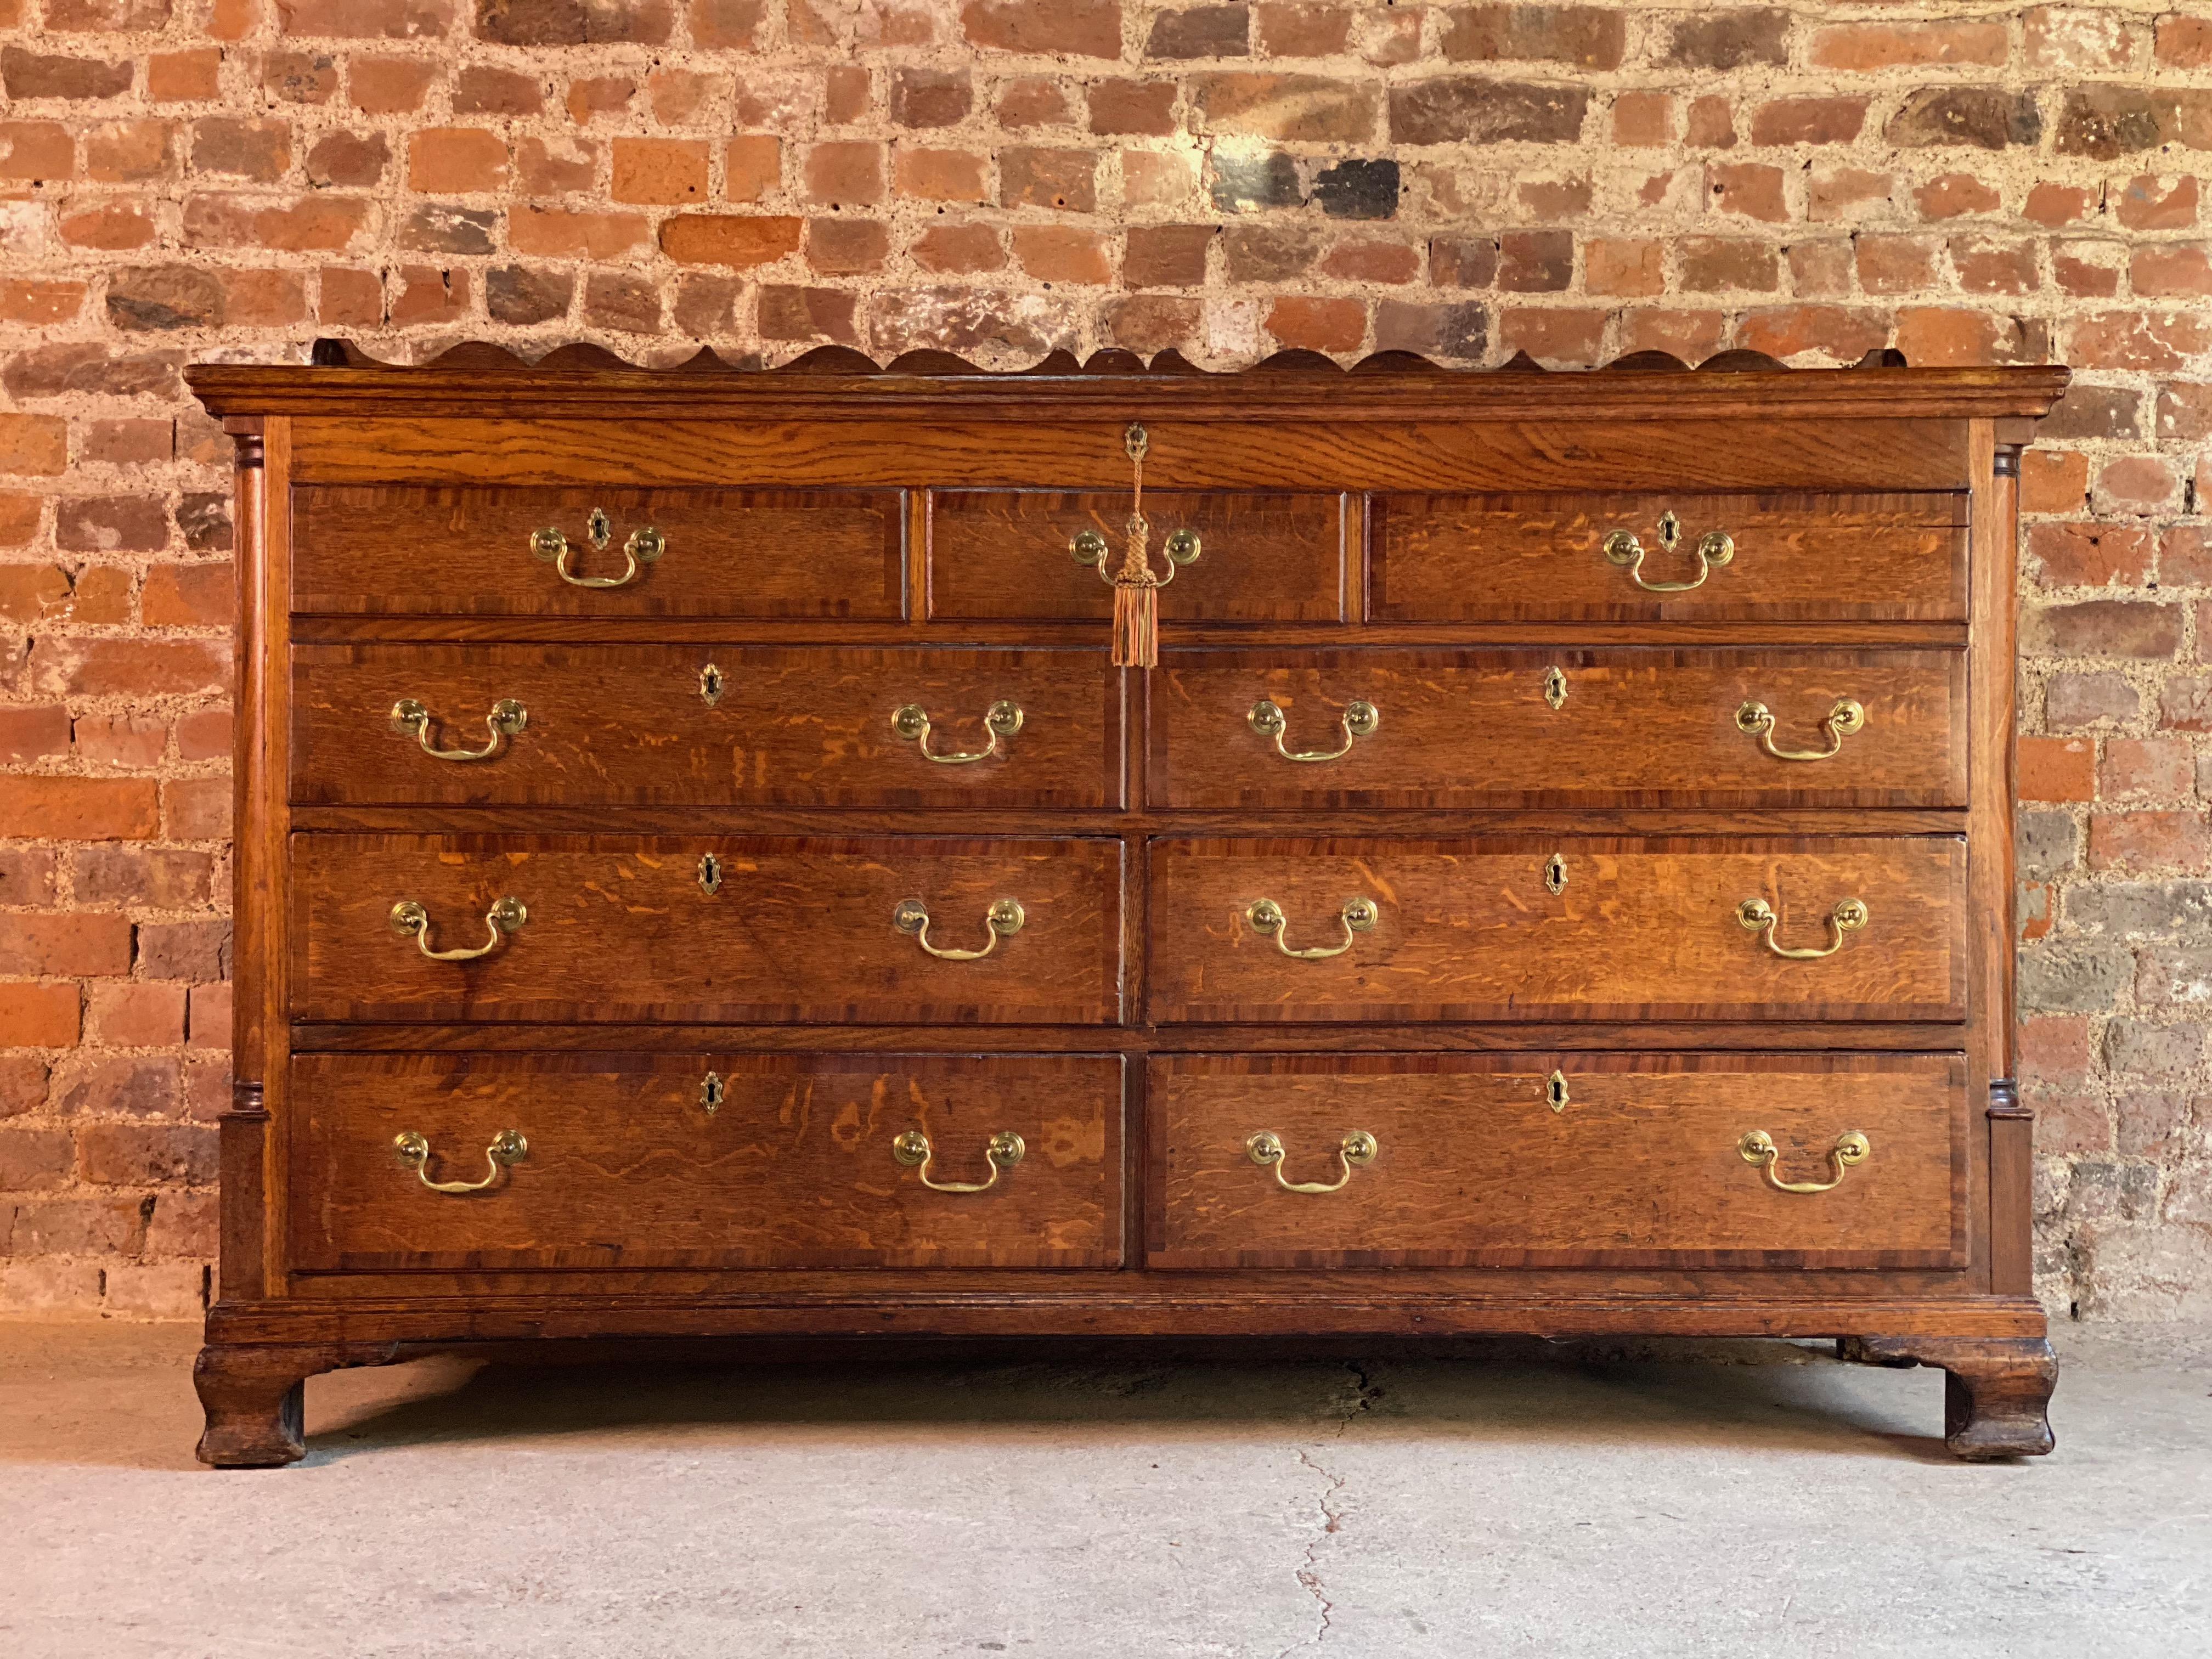 Antique Lancashire oak mule chest coffer 18th century George III, circa 1780

Magnificent large and imposing 18th century George III solid oak Lancashire mule chest circa 1780 , The rectangular galleried lidded top lifts to a reveal a deep storage